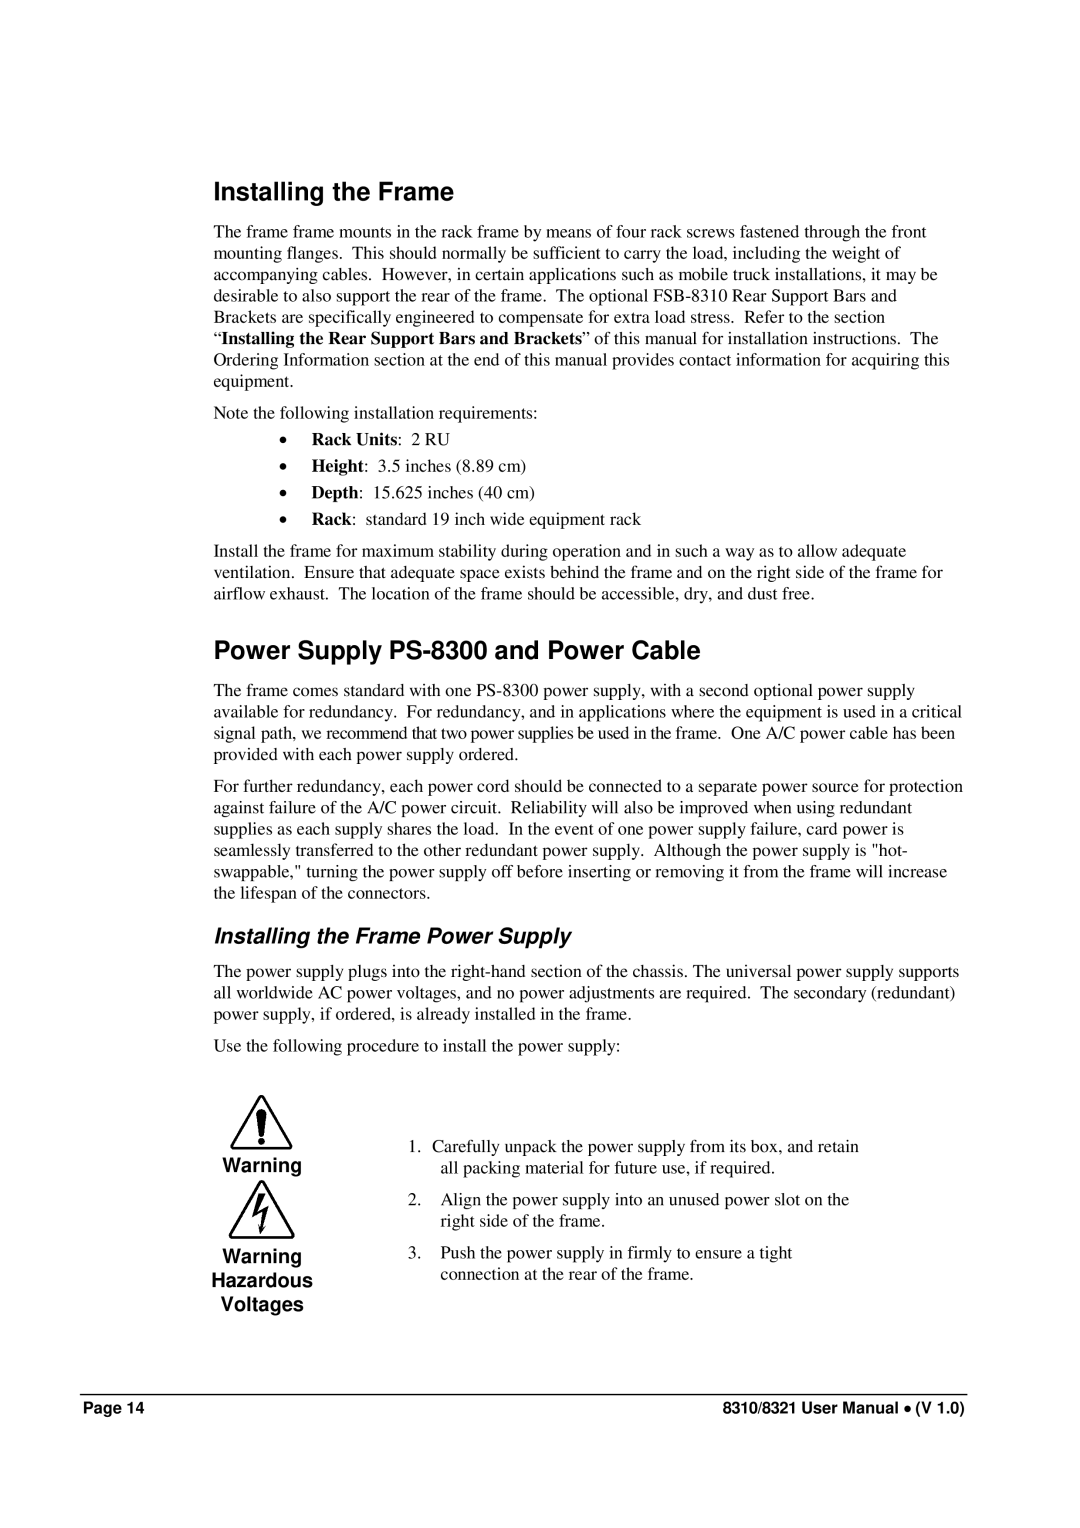 Cobalt Networks 8310(-C) Power Supply PS-8300 and Power Cable, Installing the Frame Power Supply, Hazardous Voltages 